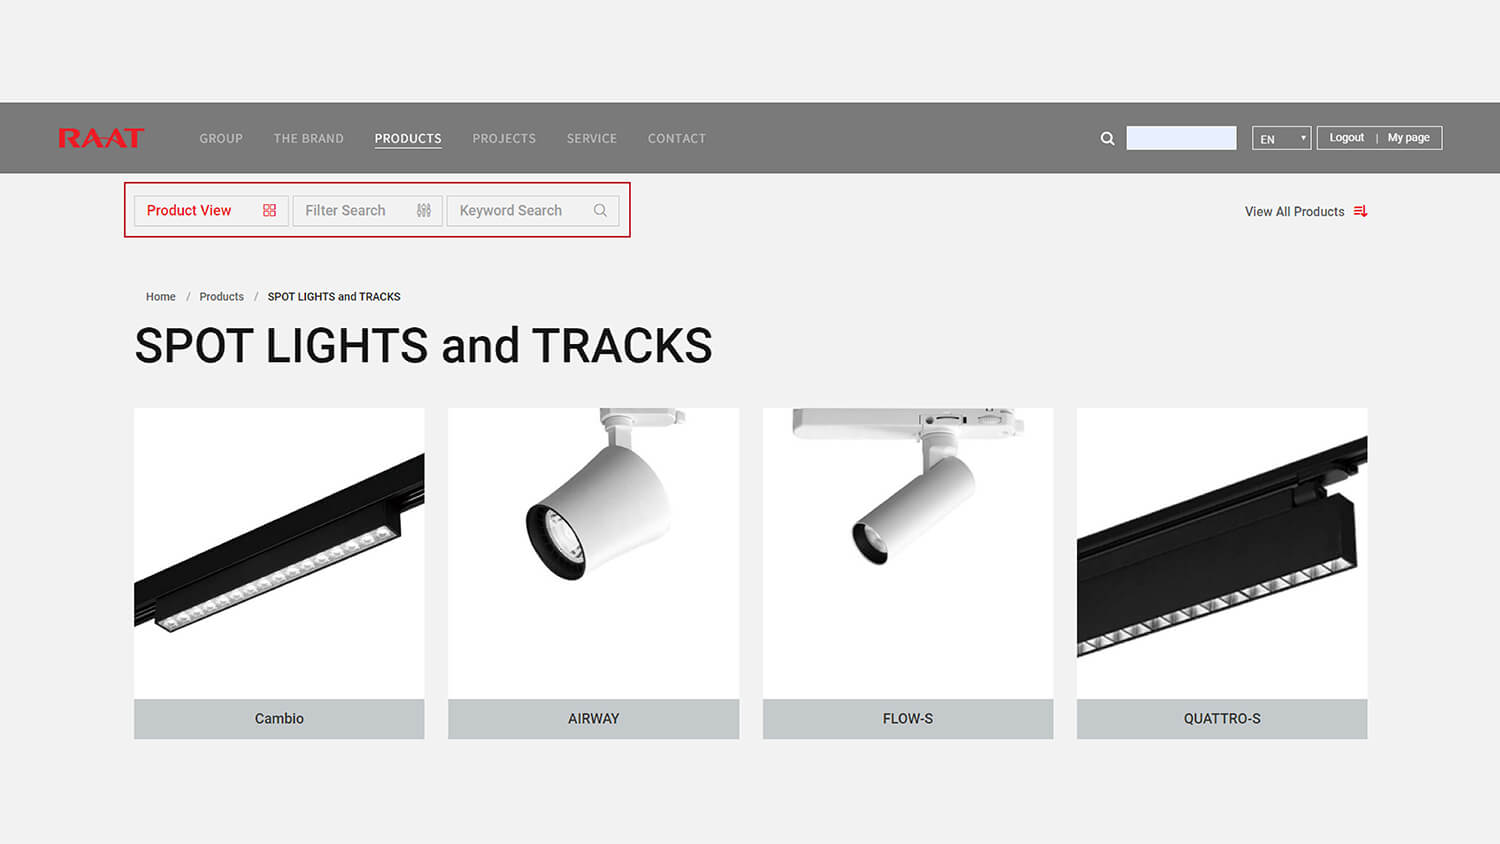 Step 4: Use the filters to locate the luminaire you are looking for.